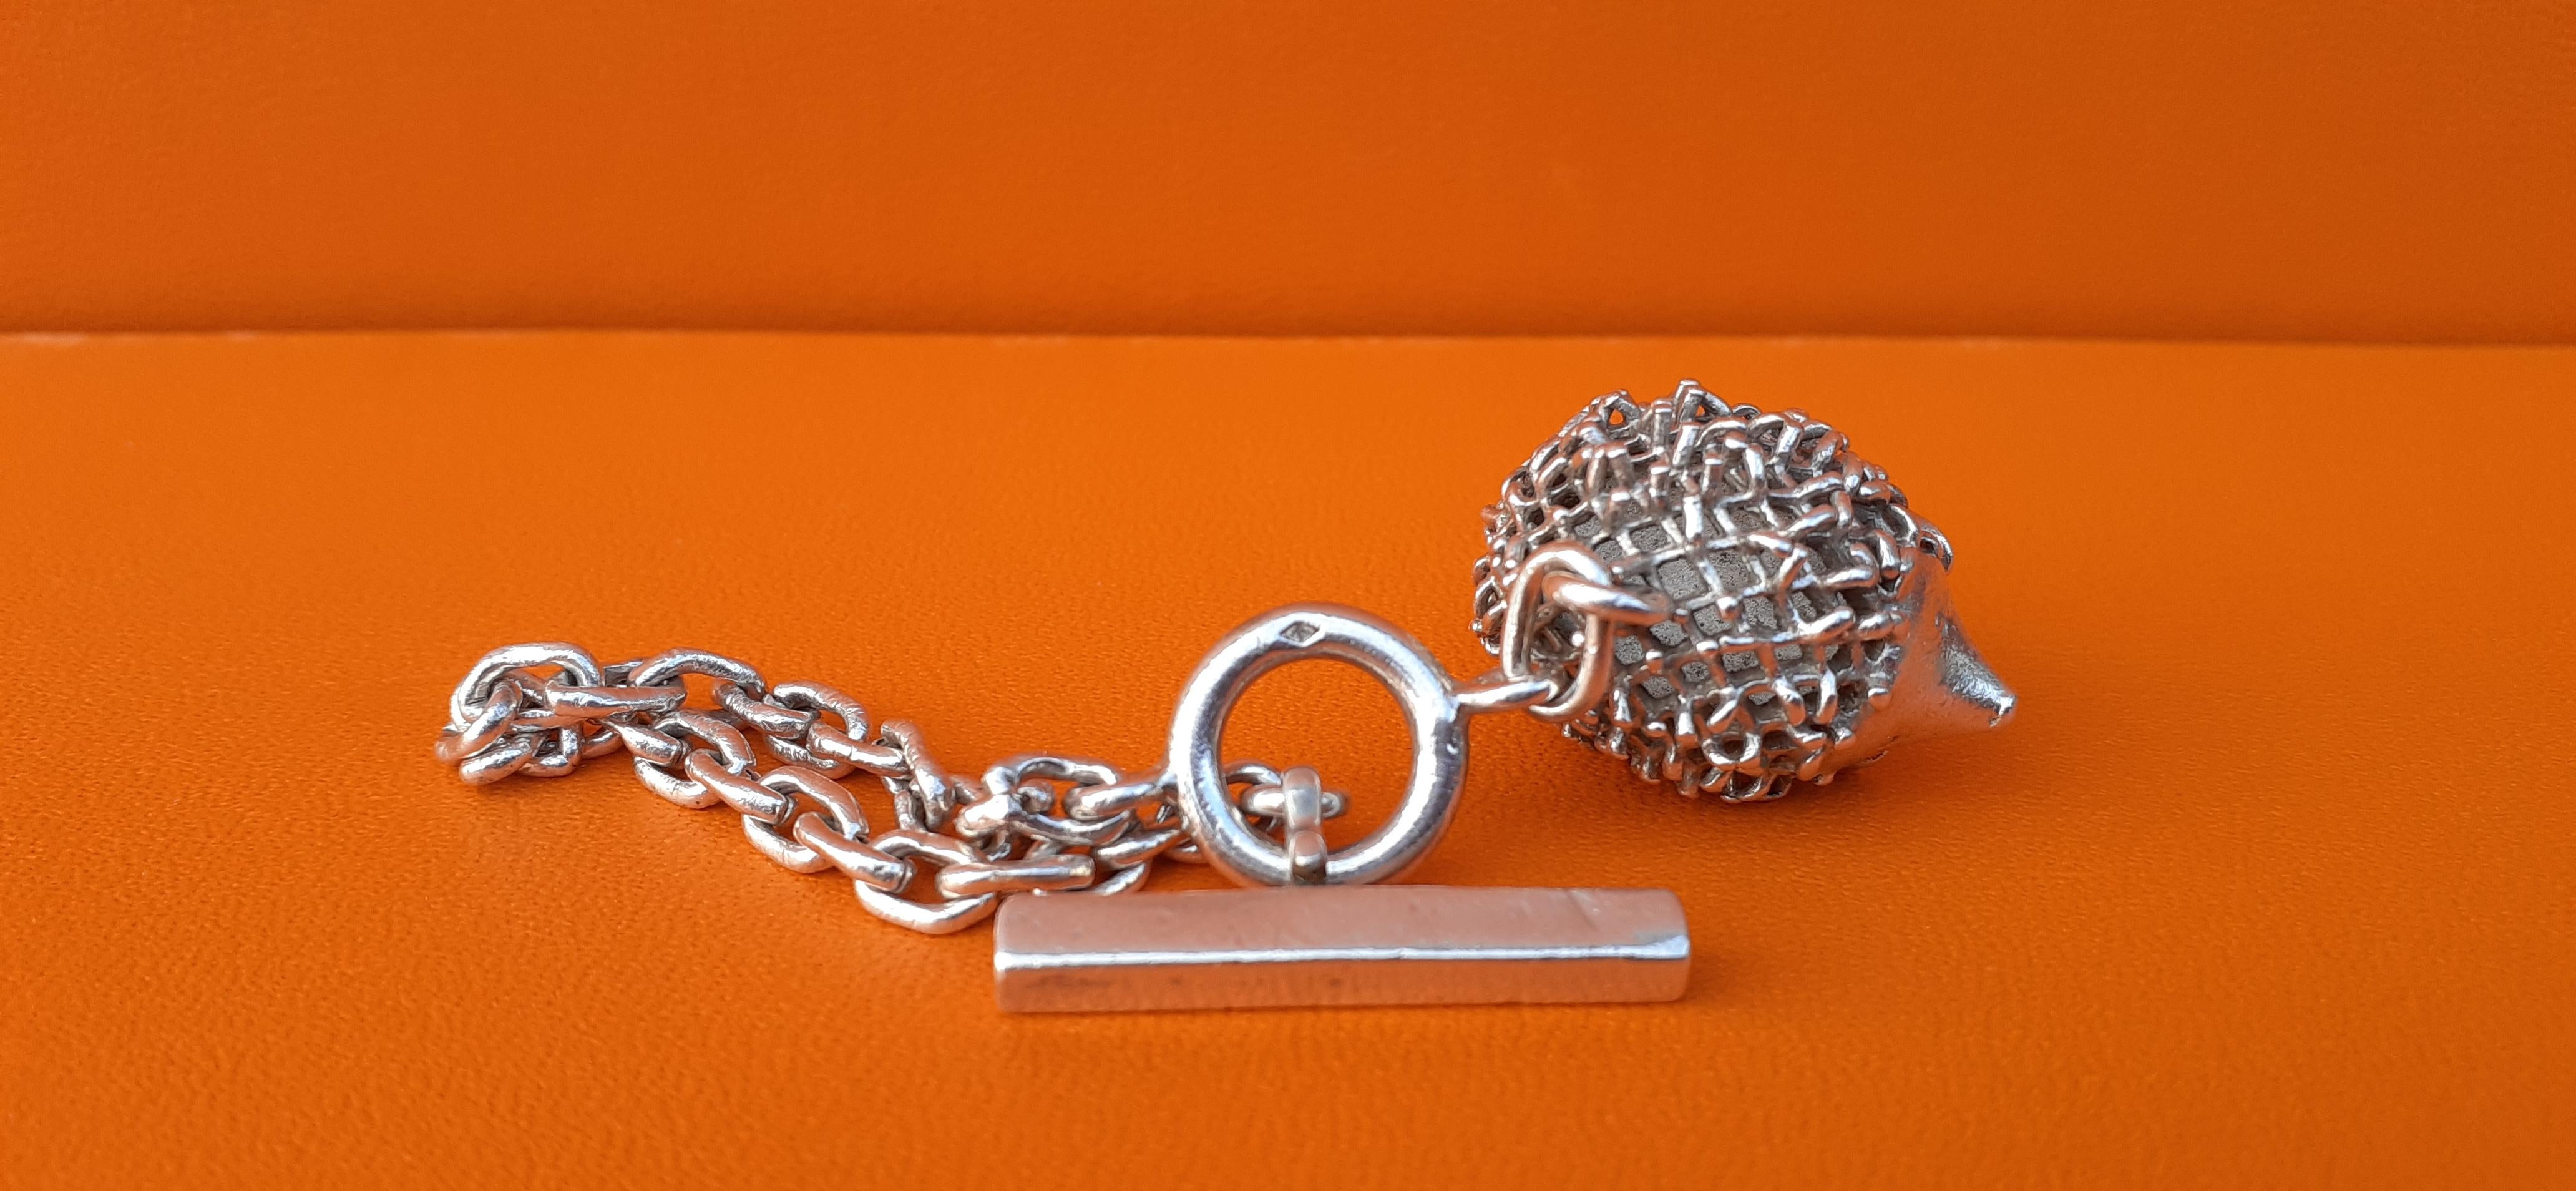 Exceptional Hermès Key Chain Charm Cute Hedgehog in Silver For Sale 7